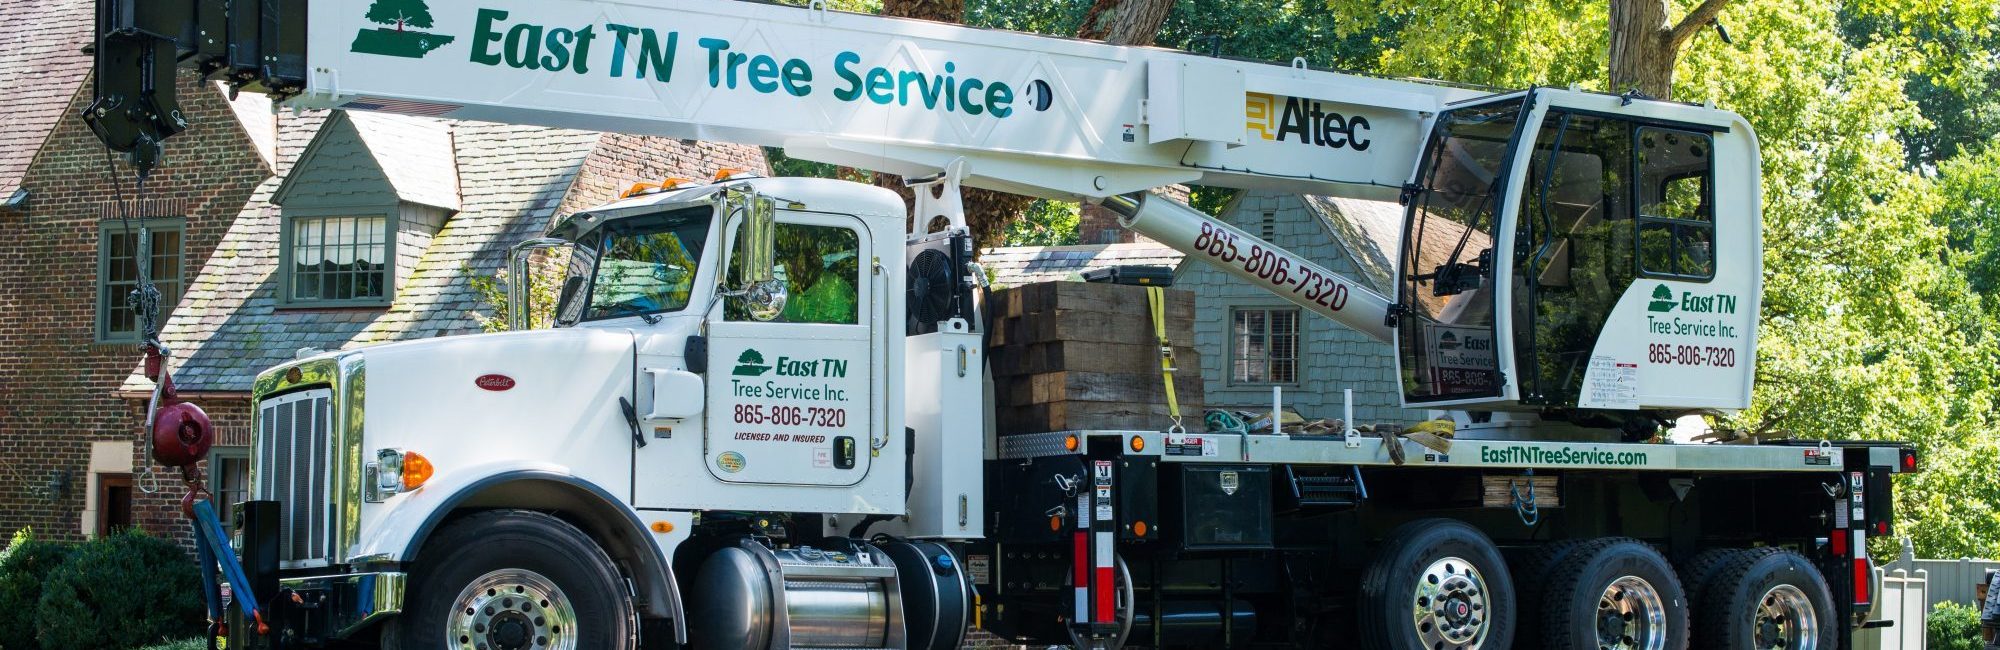 East TN Tree Service & Tree Removal in Knoxville, TN